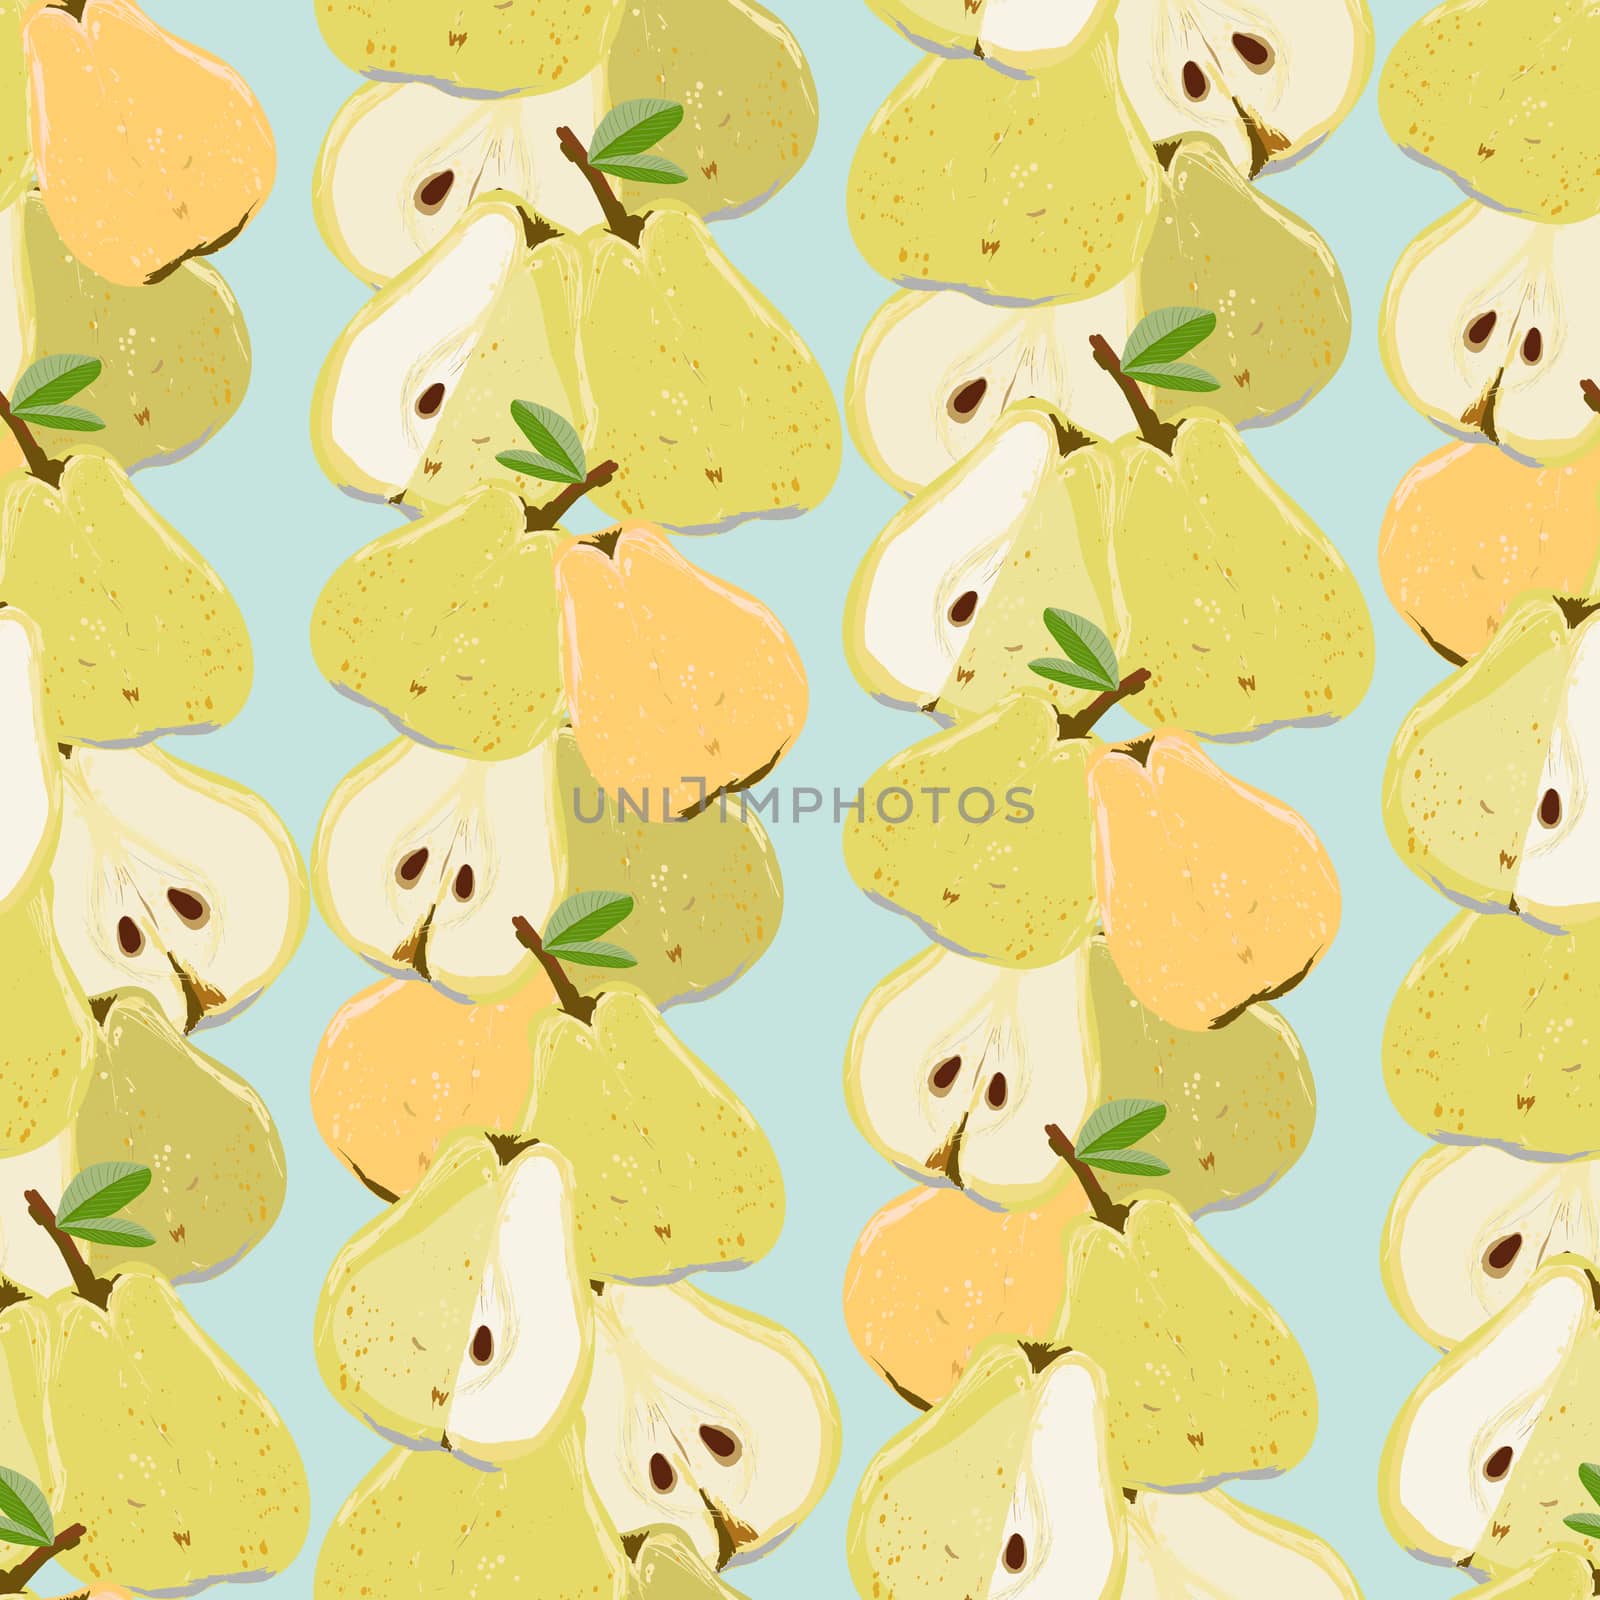 Yellow and orange juicy sliced pears seamless pattern on a turquoise background. Summer fruit endless pattern, design for wallpapers, fabrics, textiles, packaging.